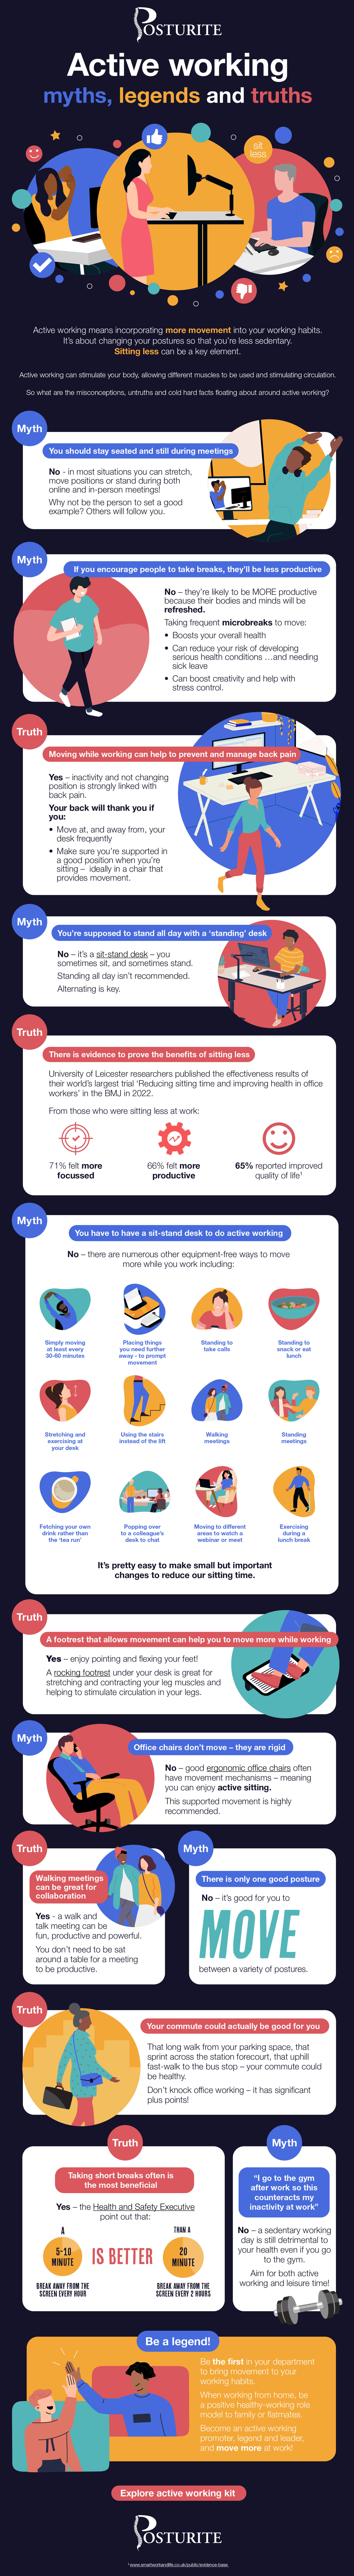 Active working infographic